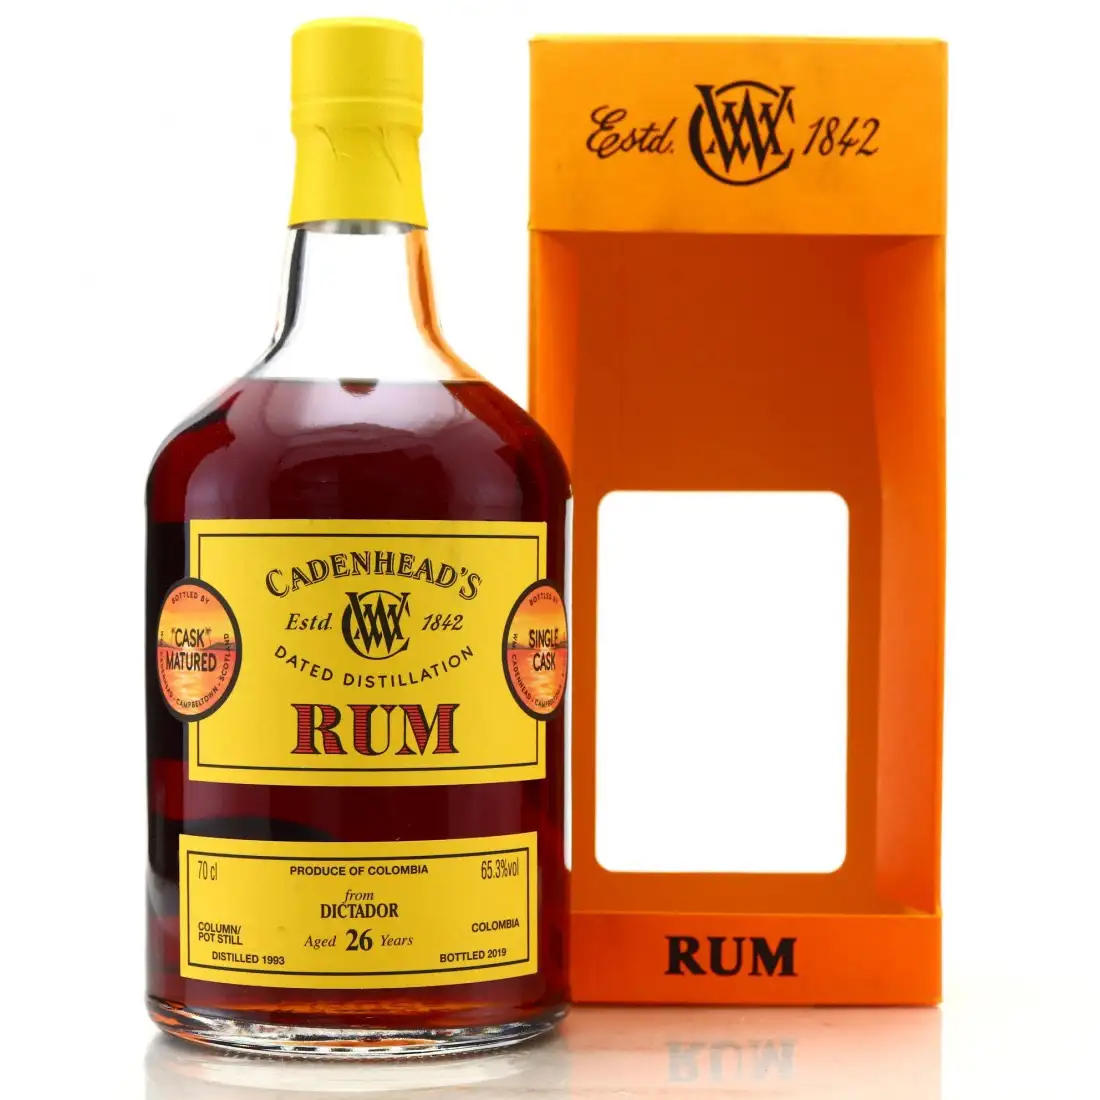 Image of the front of the bottle of the rum Dictador